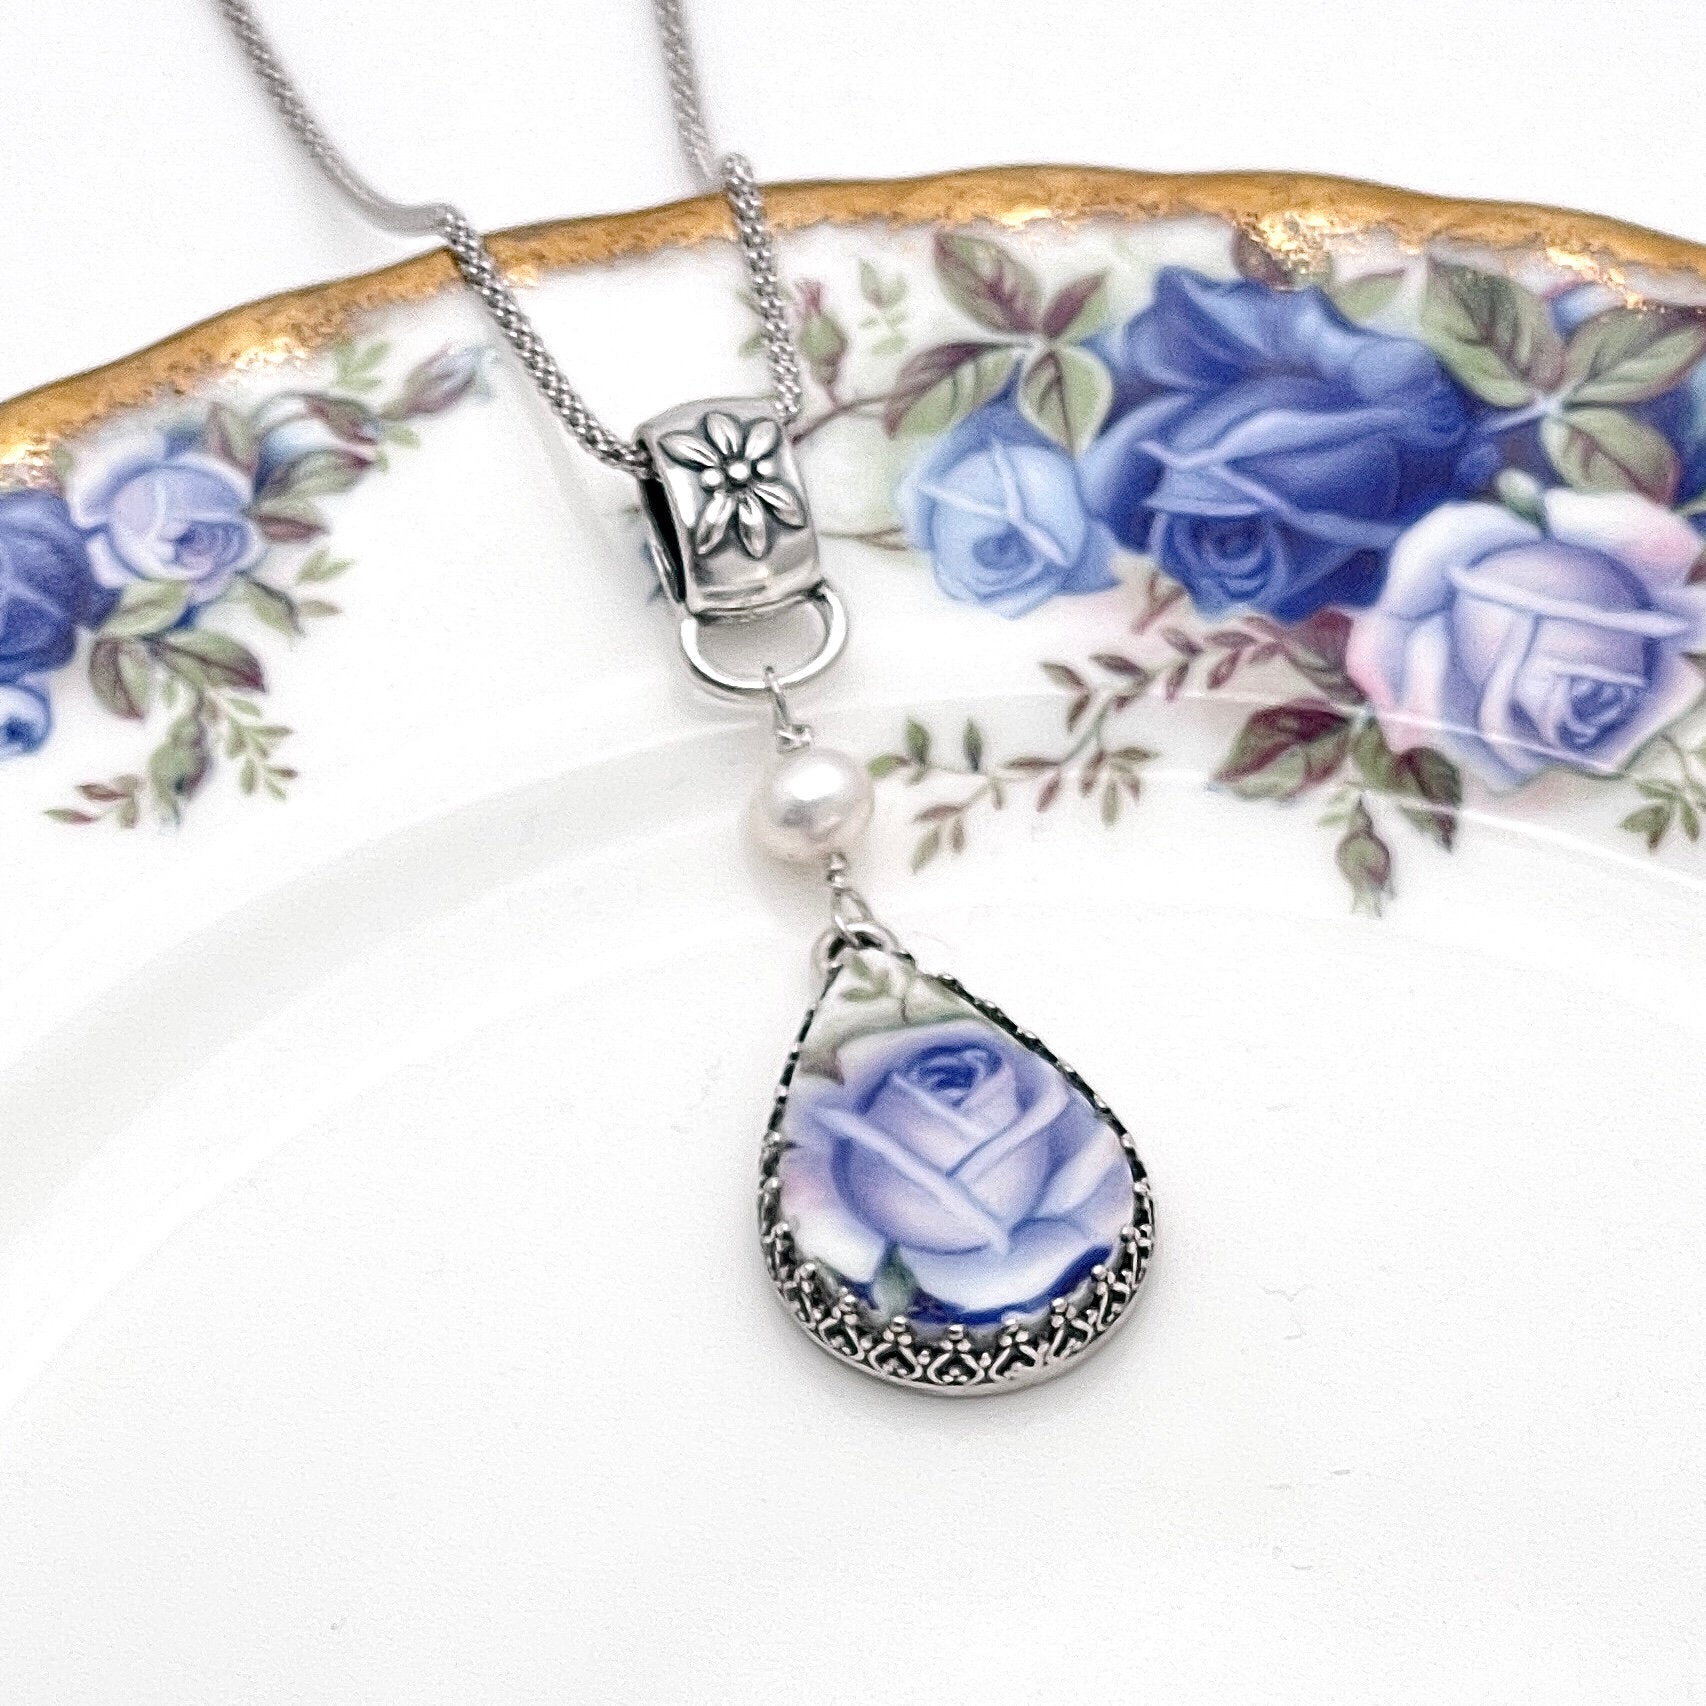 Royal Albert Moonlight Rose Broken China Jewelry, 20th Anniversary Gift for Wife, Pearl Necklace, Unique Gift, Graduation Gifts